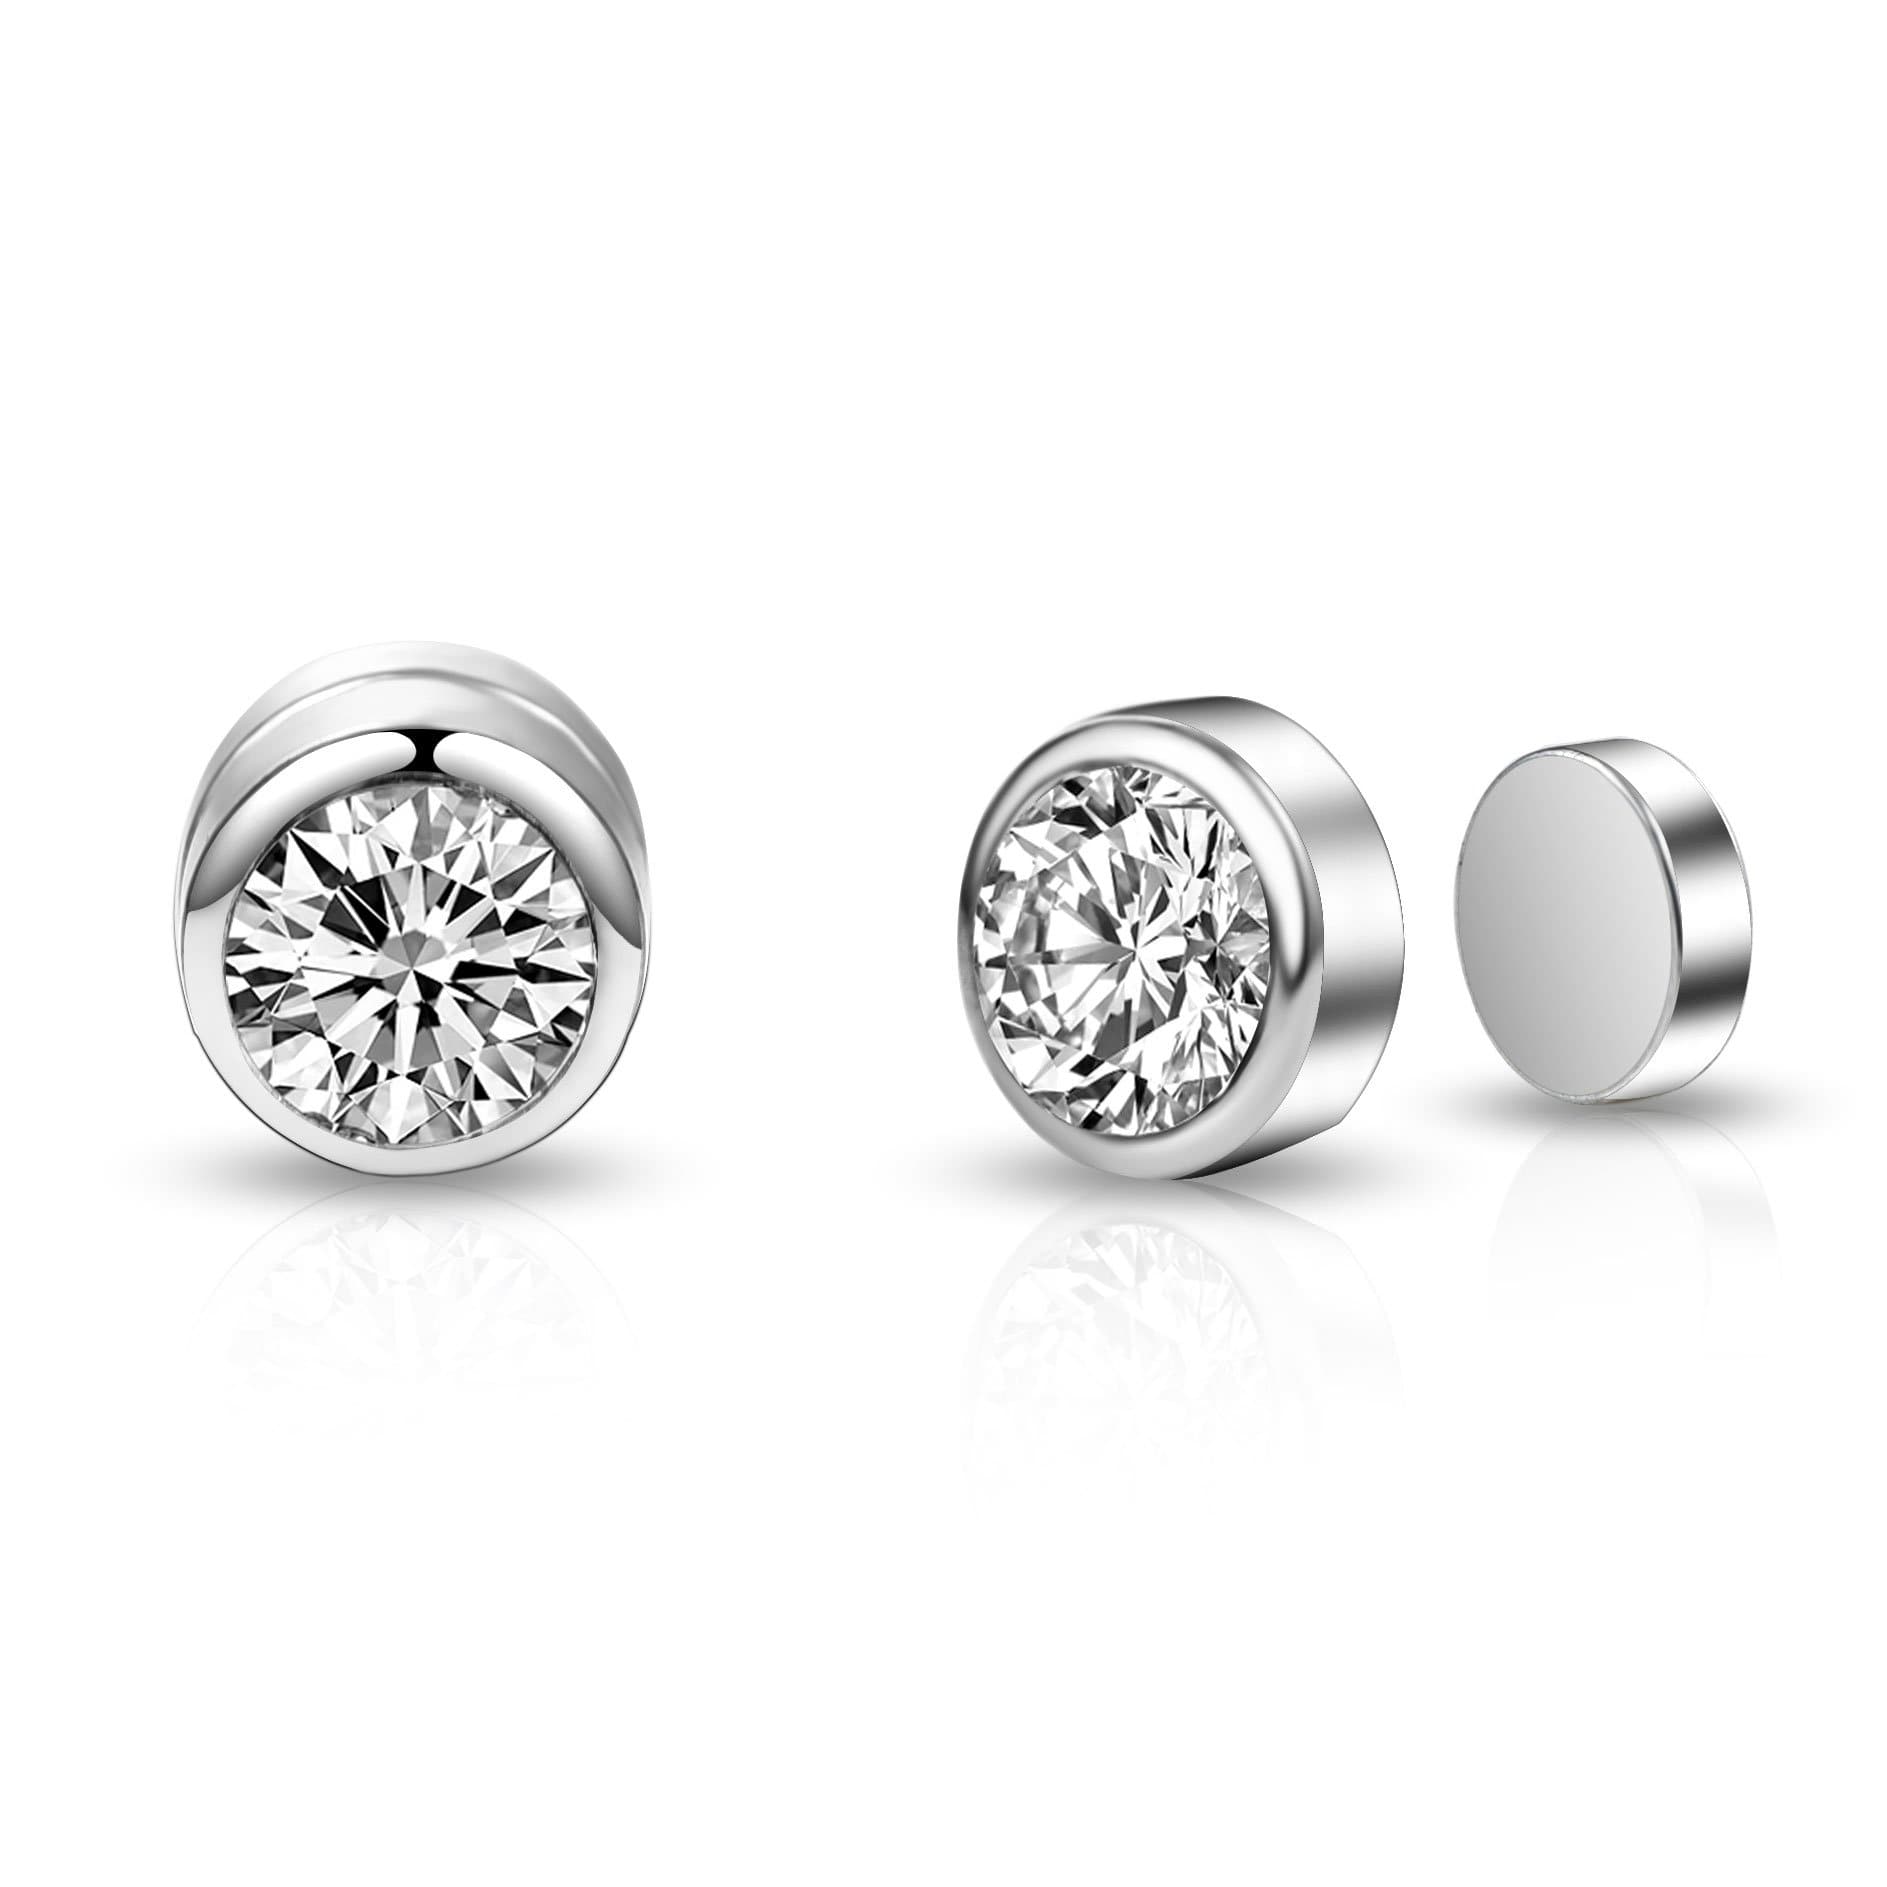 Silver Plated 6mm Magnetic Clip On Earrings Created with Zircondia® Crystals by Philip Jones Jewellery